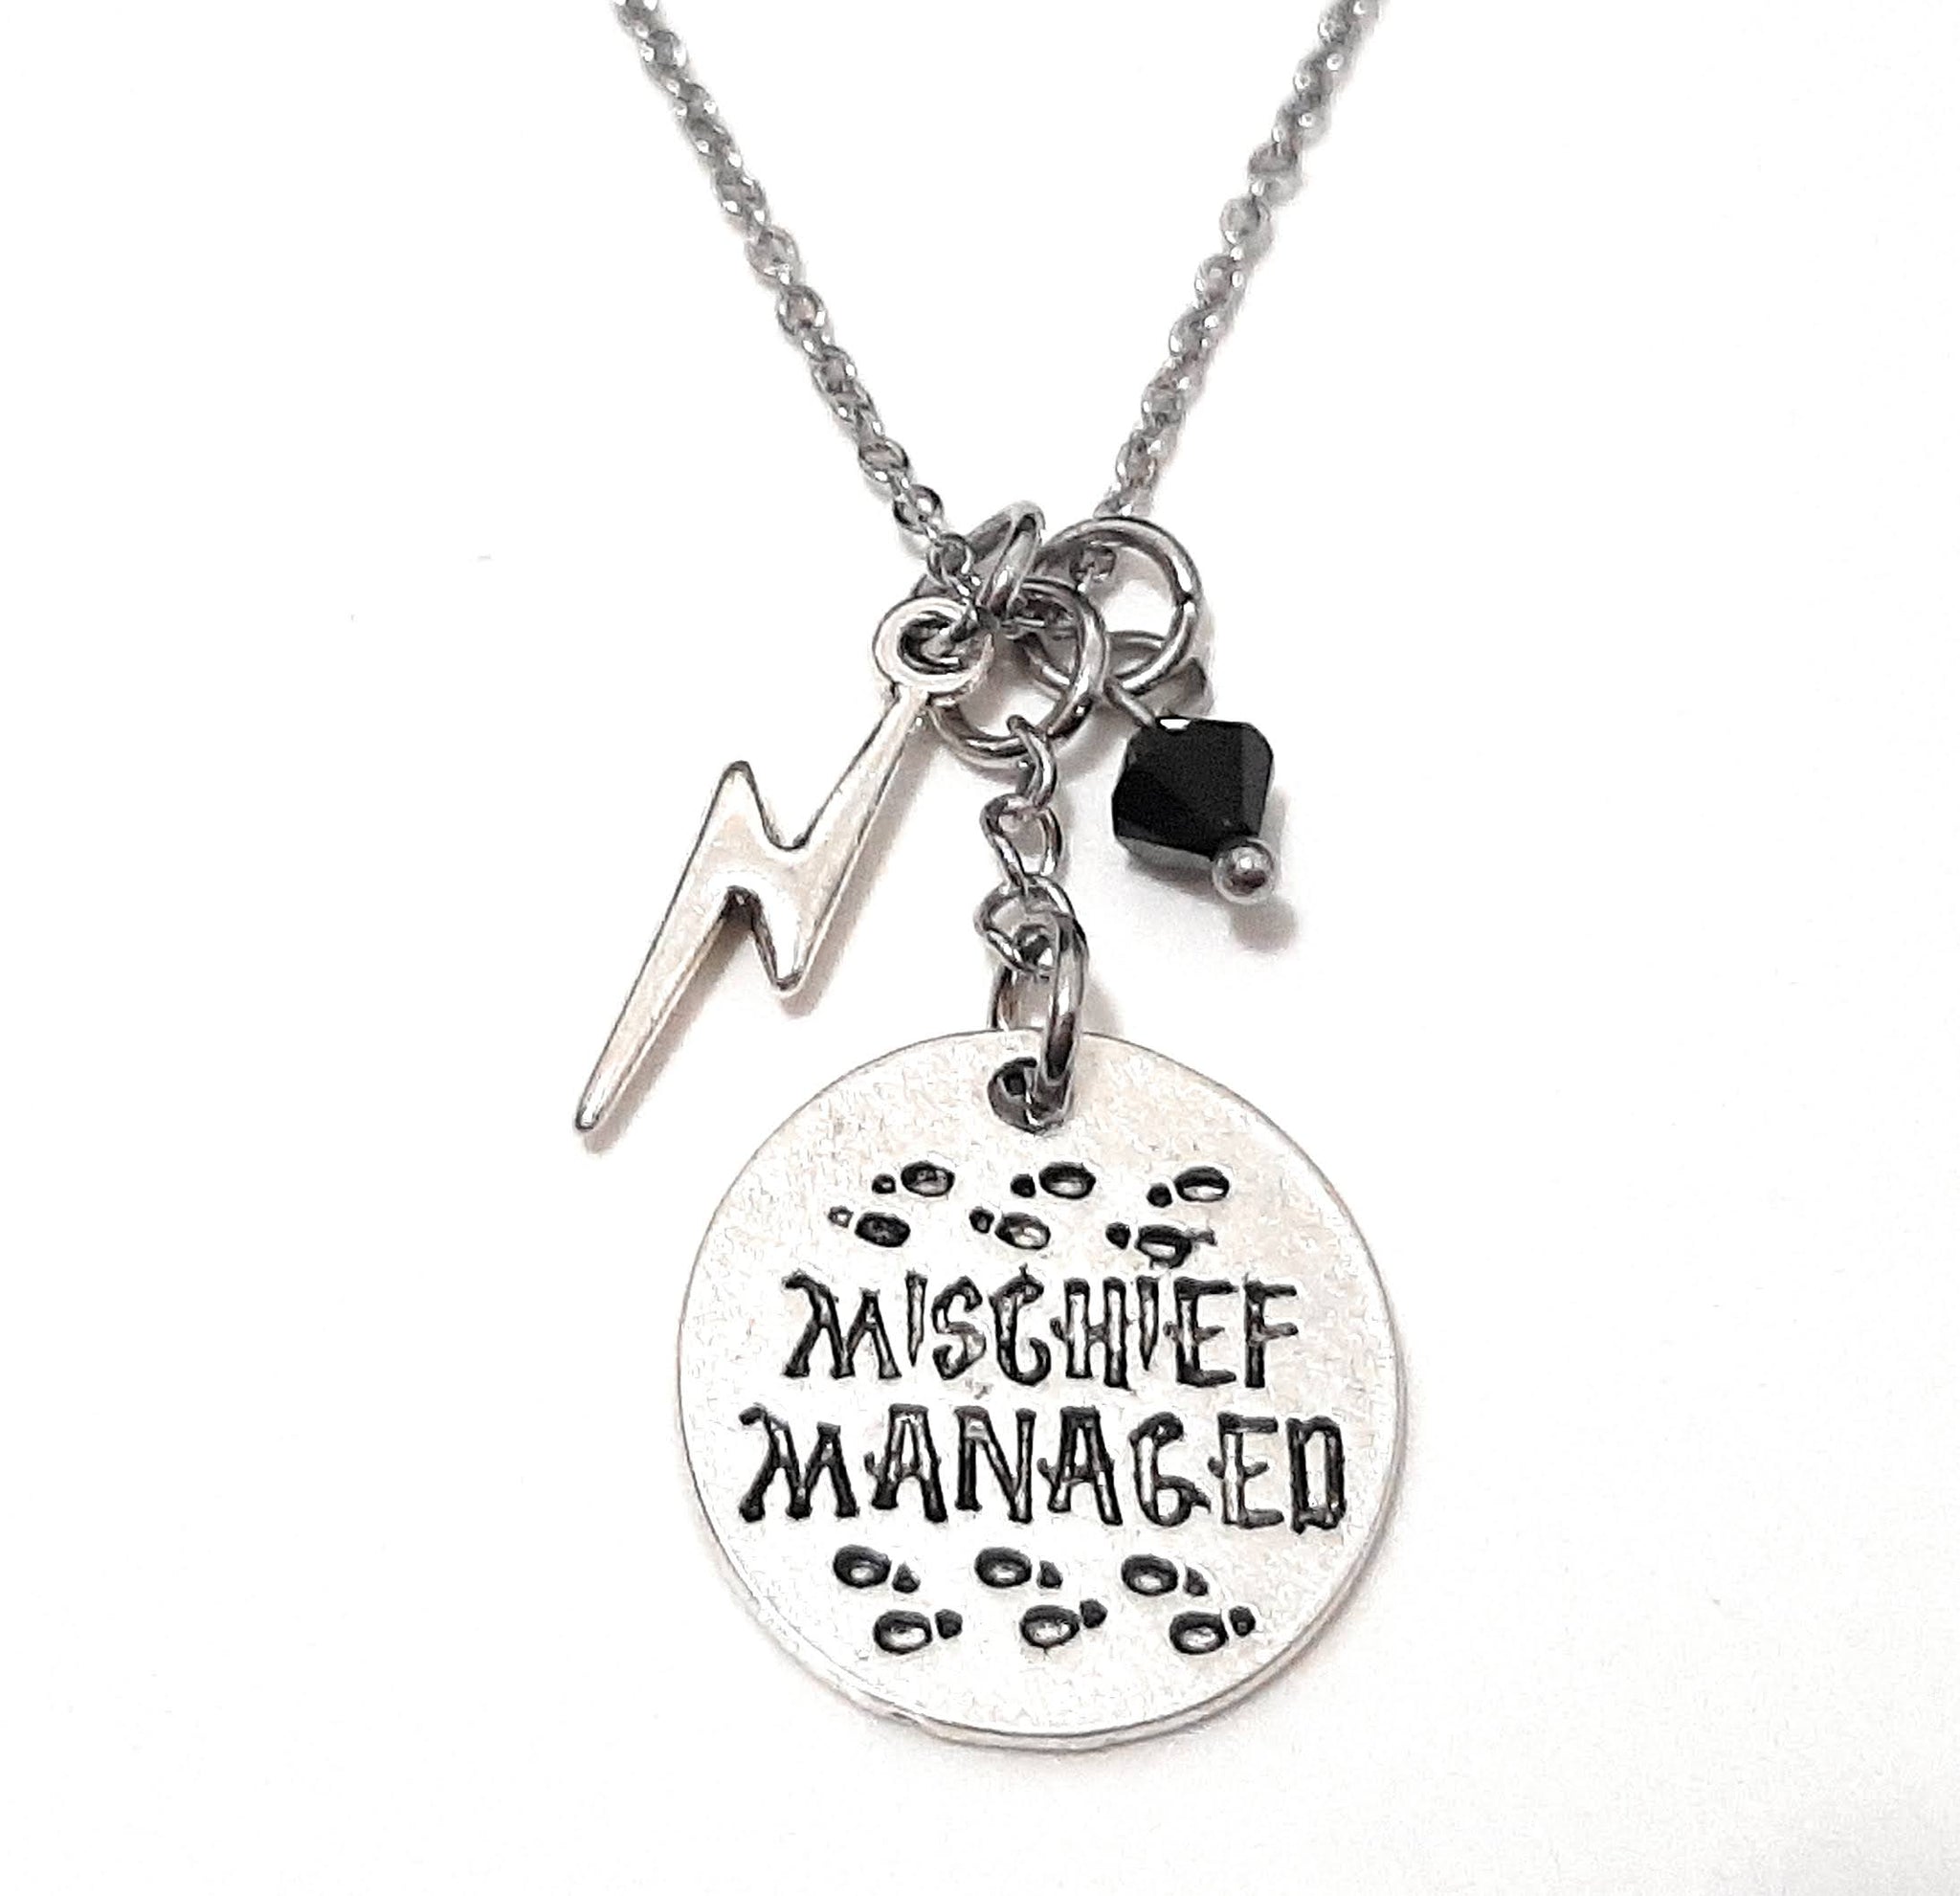 Message Pendant Necklace "Mischief Managed" Your Choice of Charm and Birthstone Color